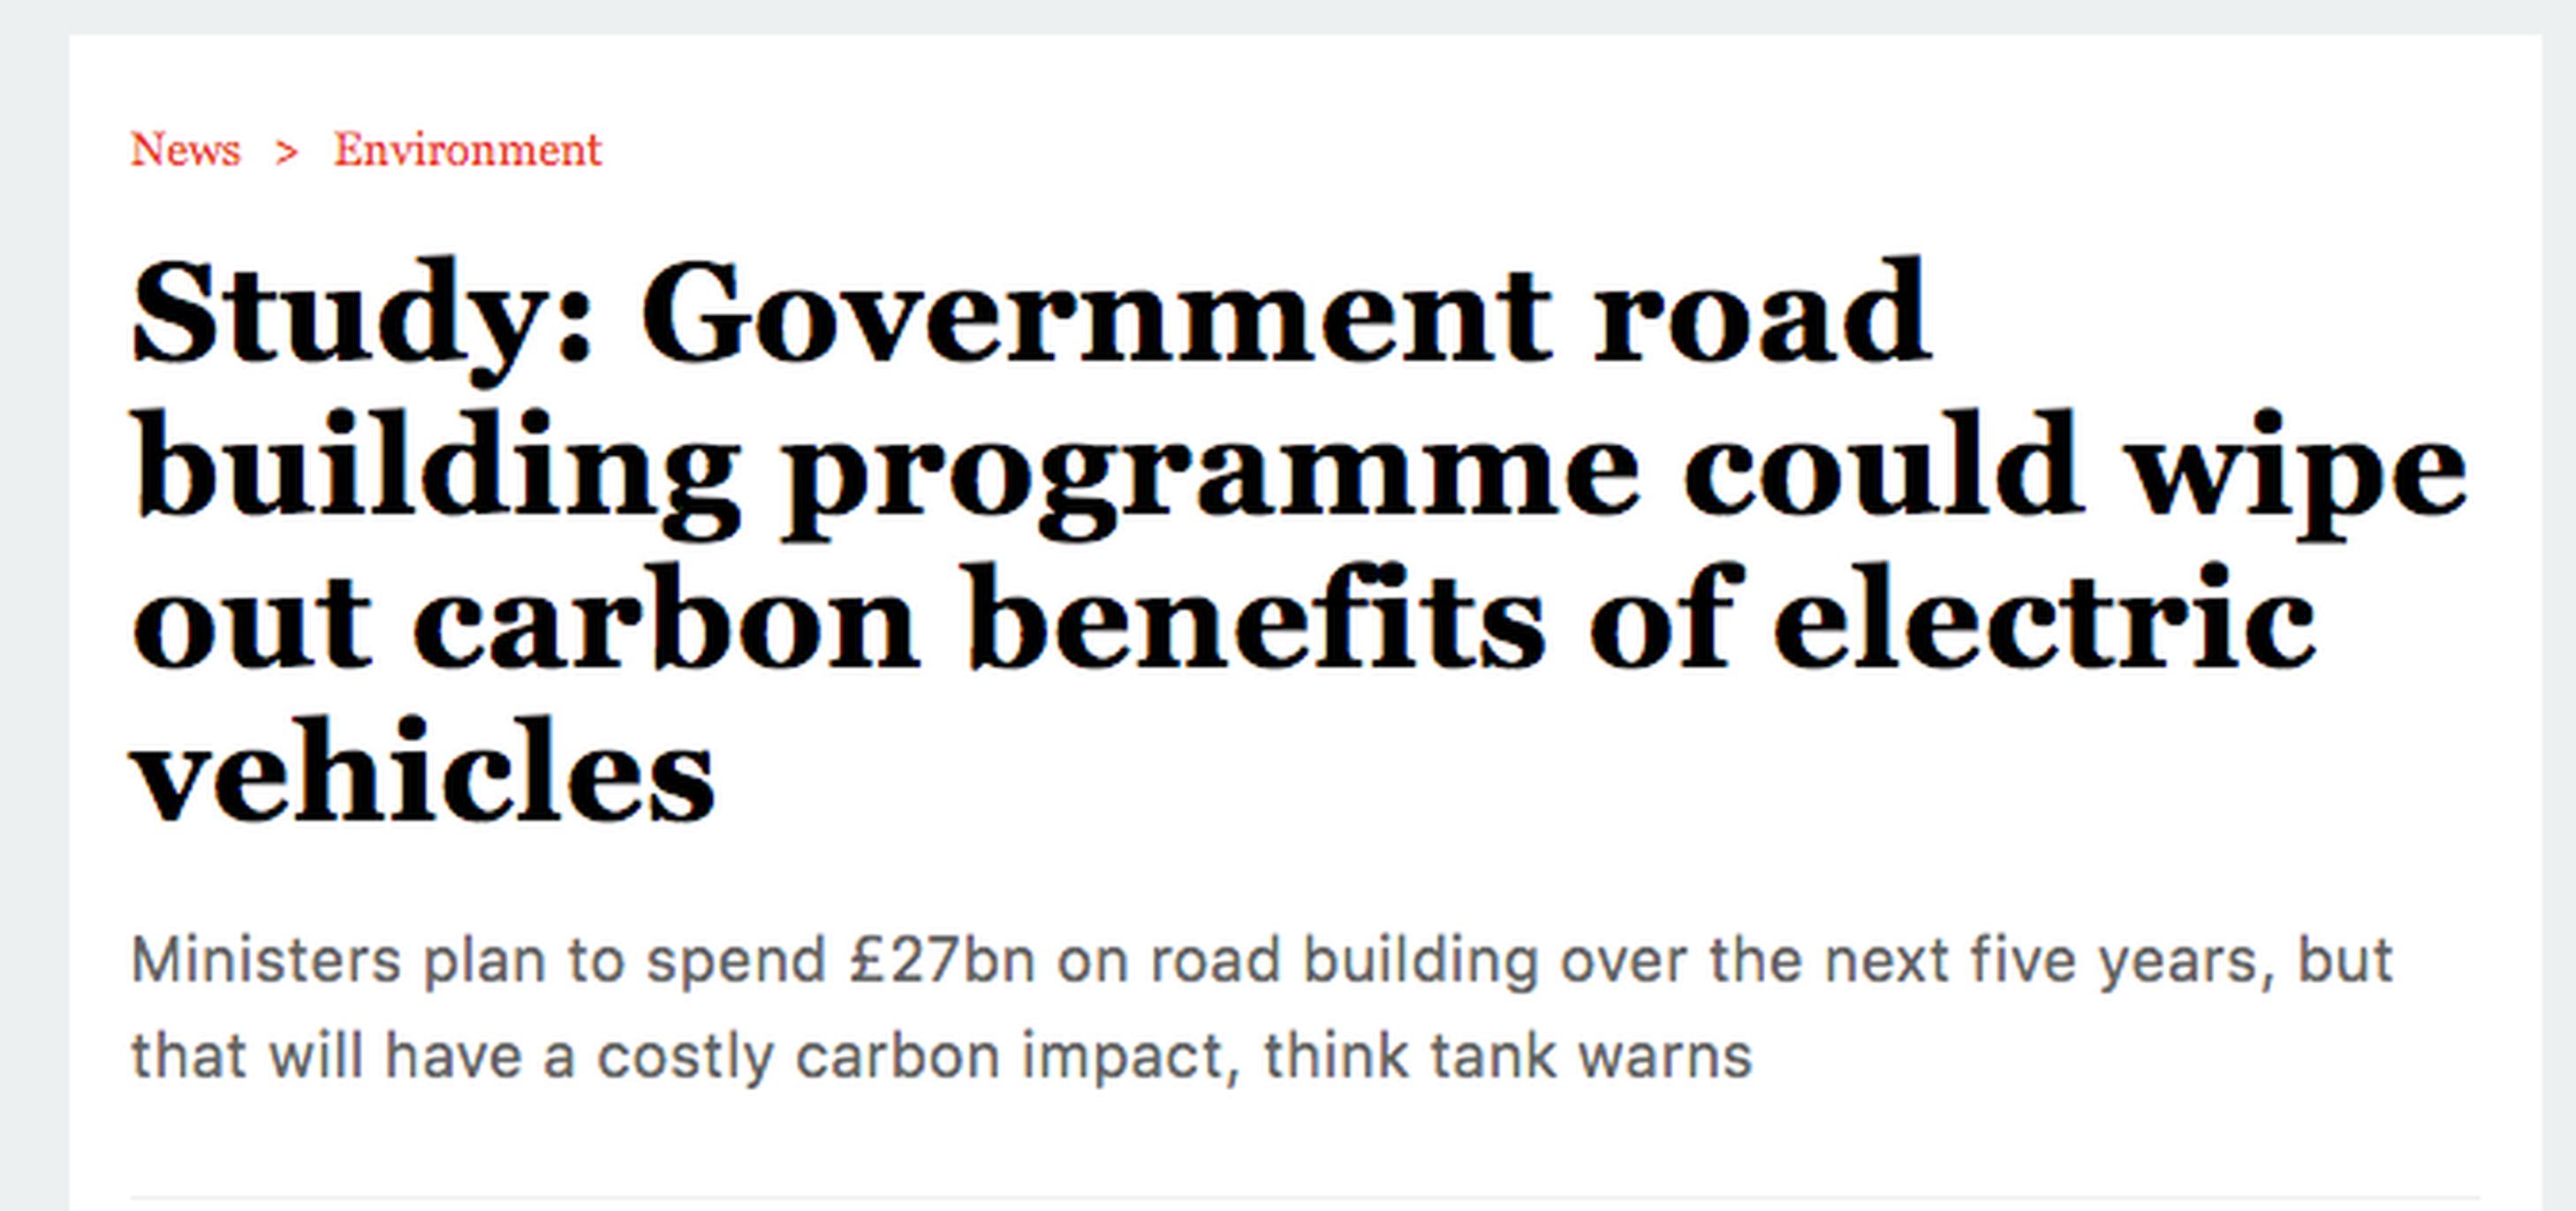 The Transport of Quality of Life study calculates 80% of the carbon savings from switching to electric vehicles will be wiped out by the £27 billion roads plan that TAN is seeking to challenge in court. Headline in the i, July 10